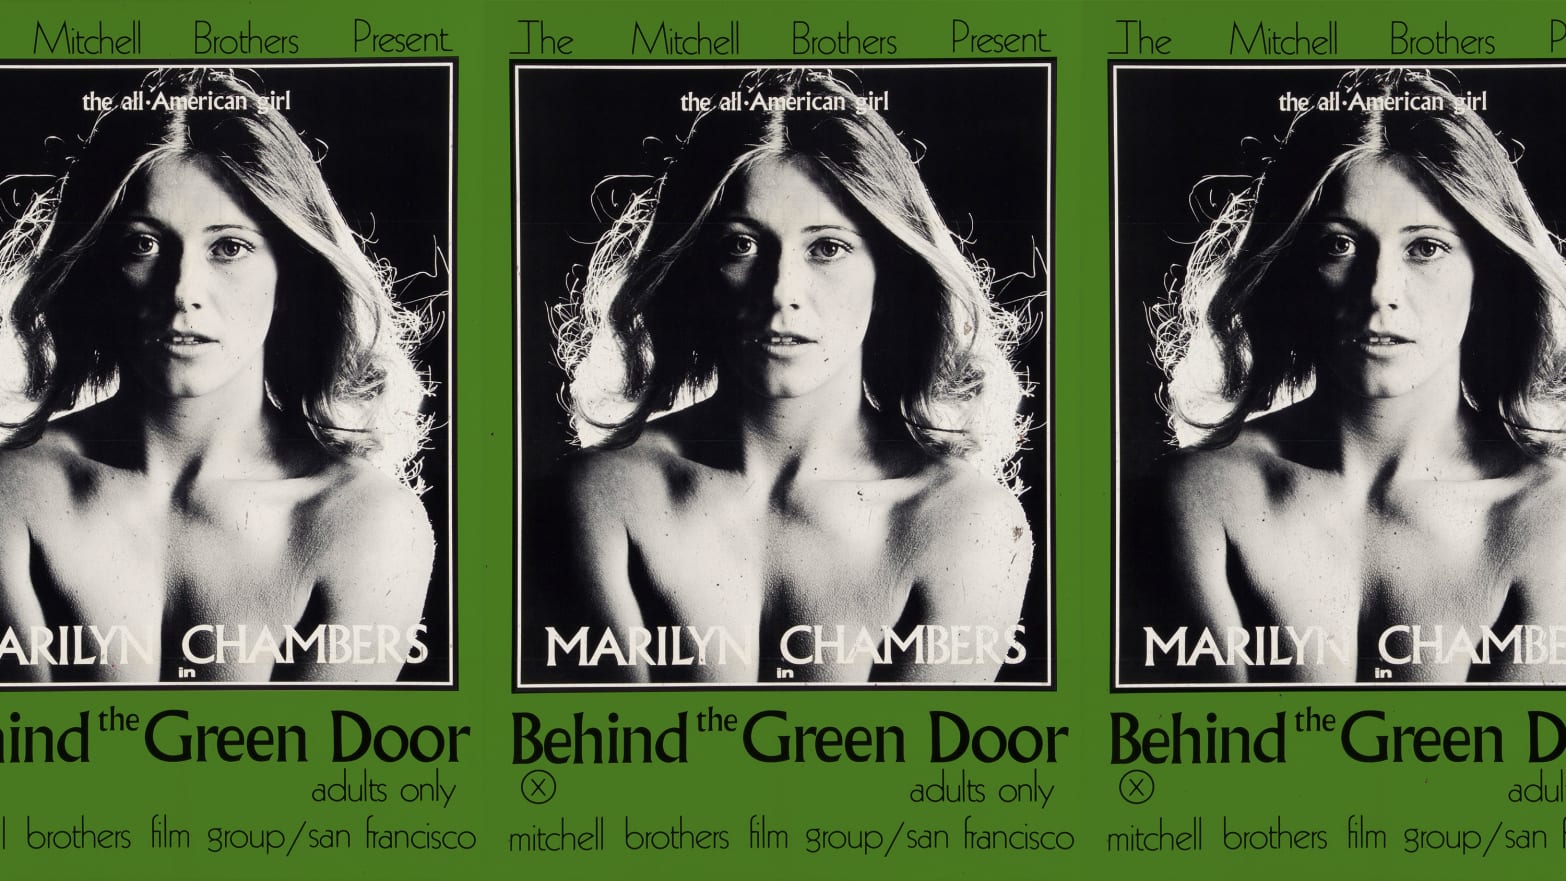 Fifty Years of Behind the Green Door, the Groundbreaking Porn Film That Upset the Supreme Court pic